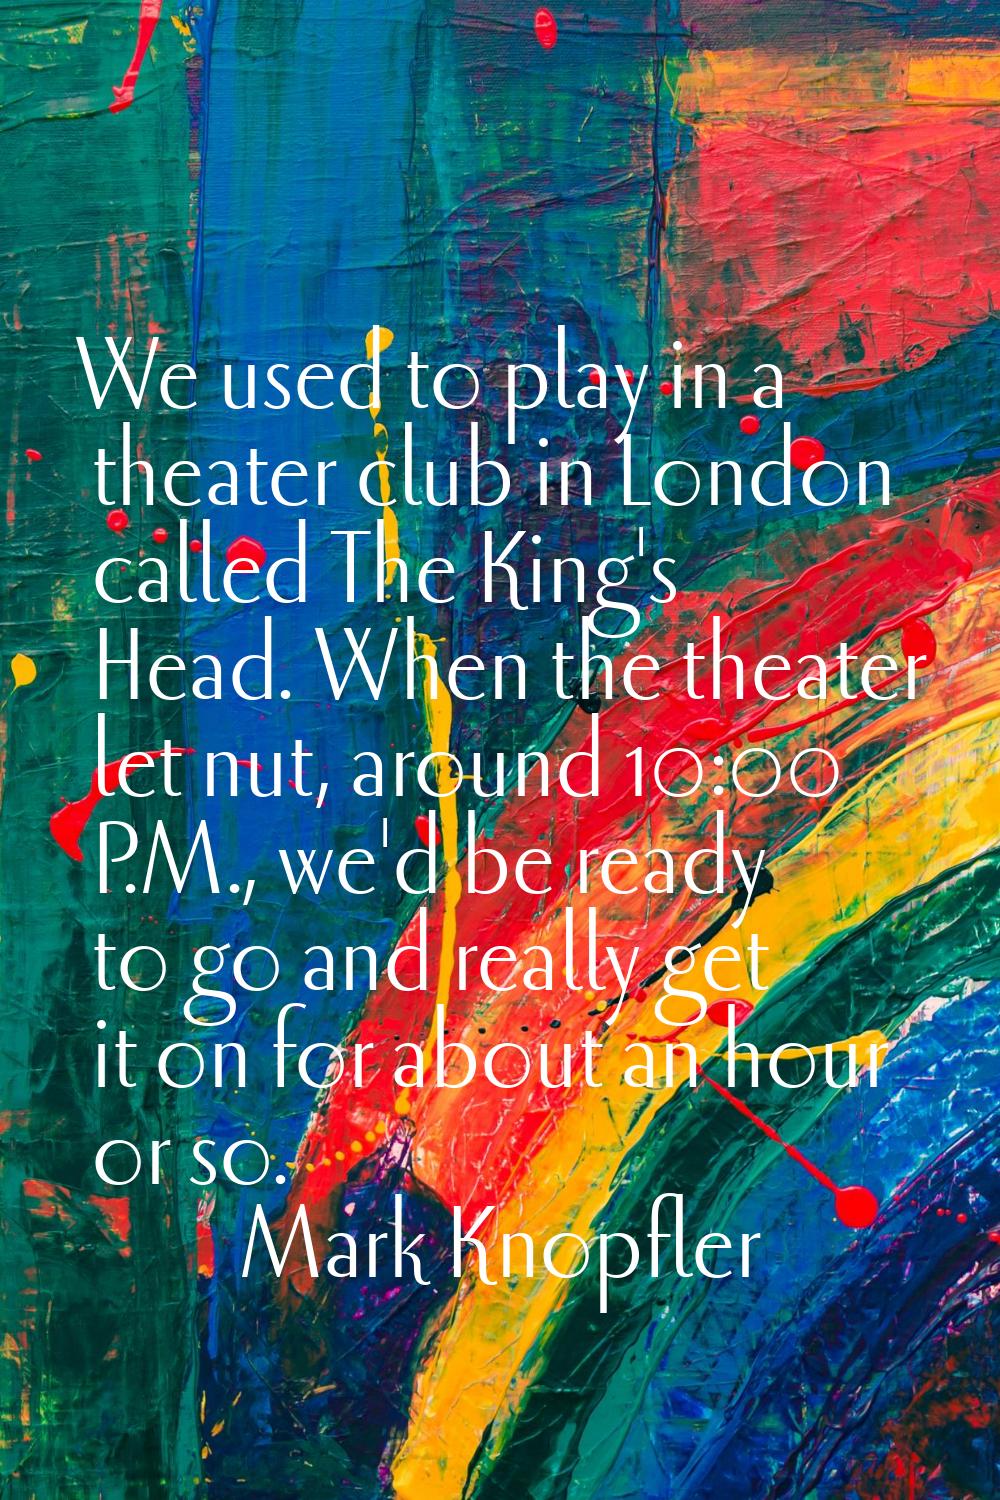 We used to play in a theater club in London called The King's Head. When the theater let nut, aroun